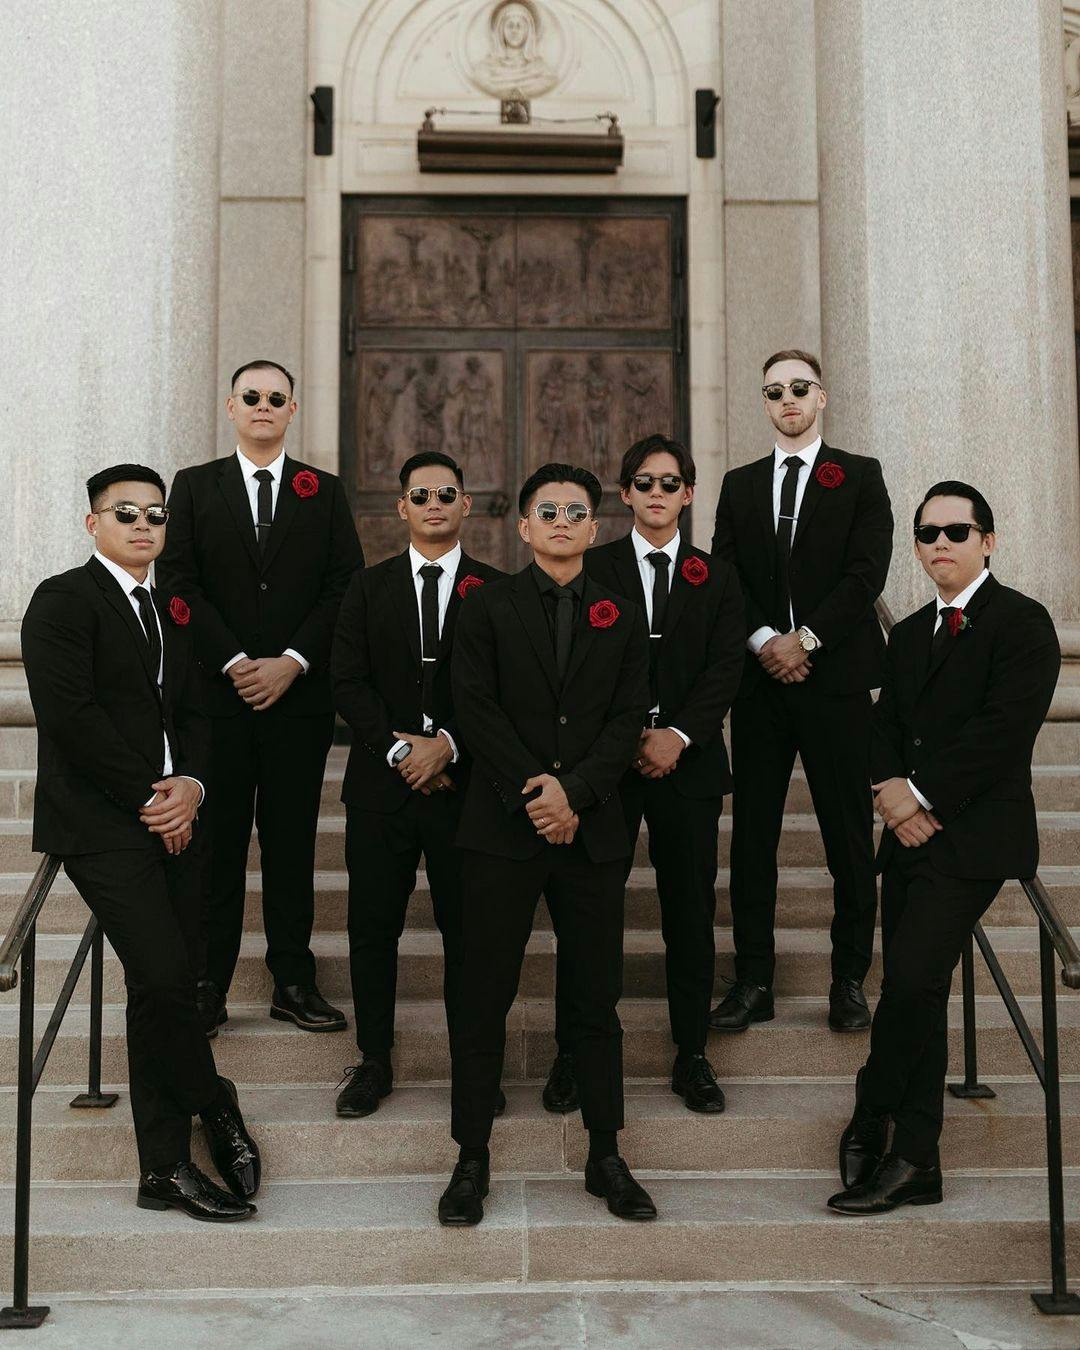 Black suit groomsman group with red rosette lapel pins and all-black suit ensemble for the groom.